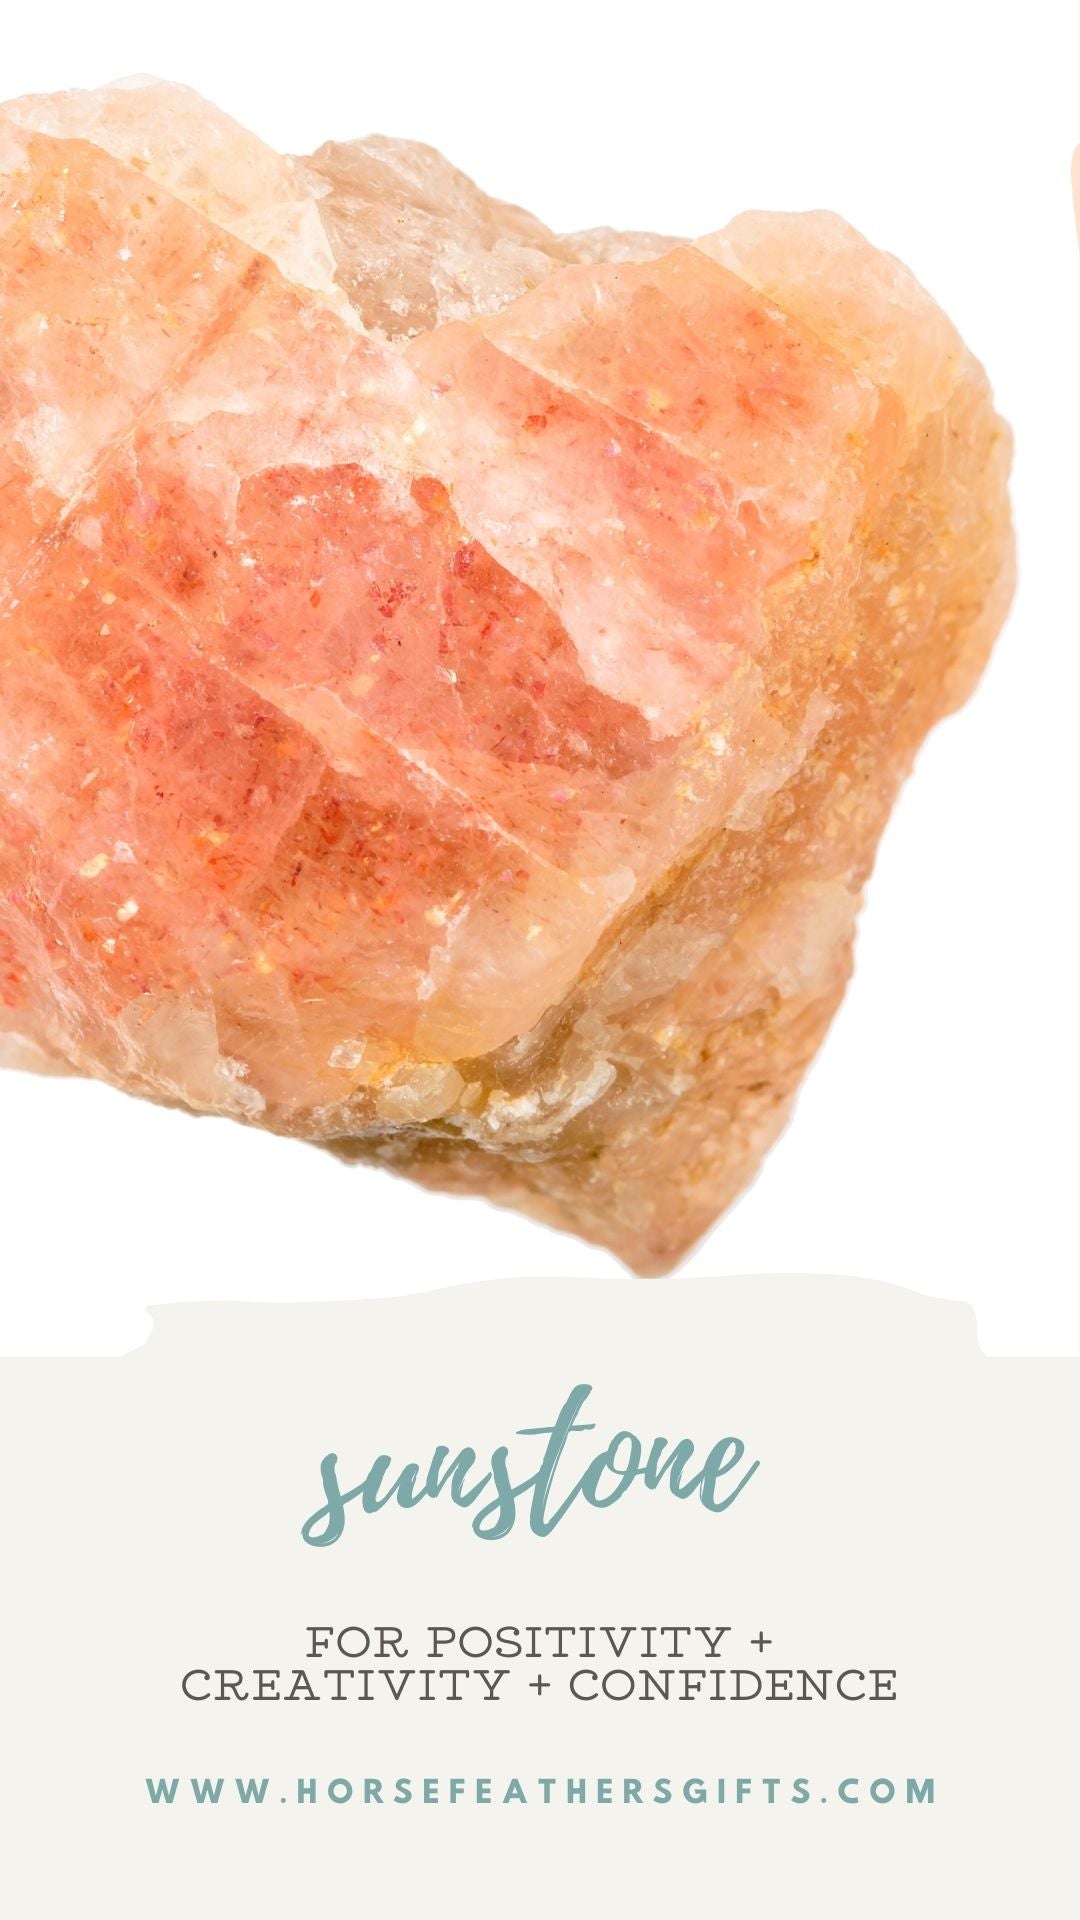 sunstone meaning and gem properties 